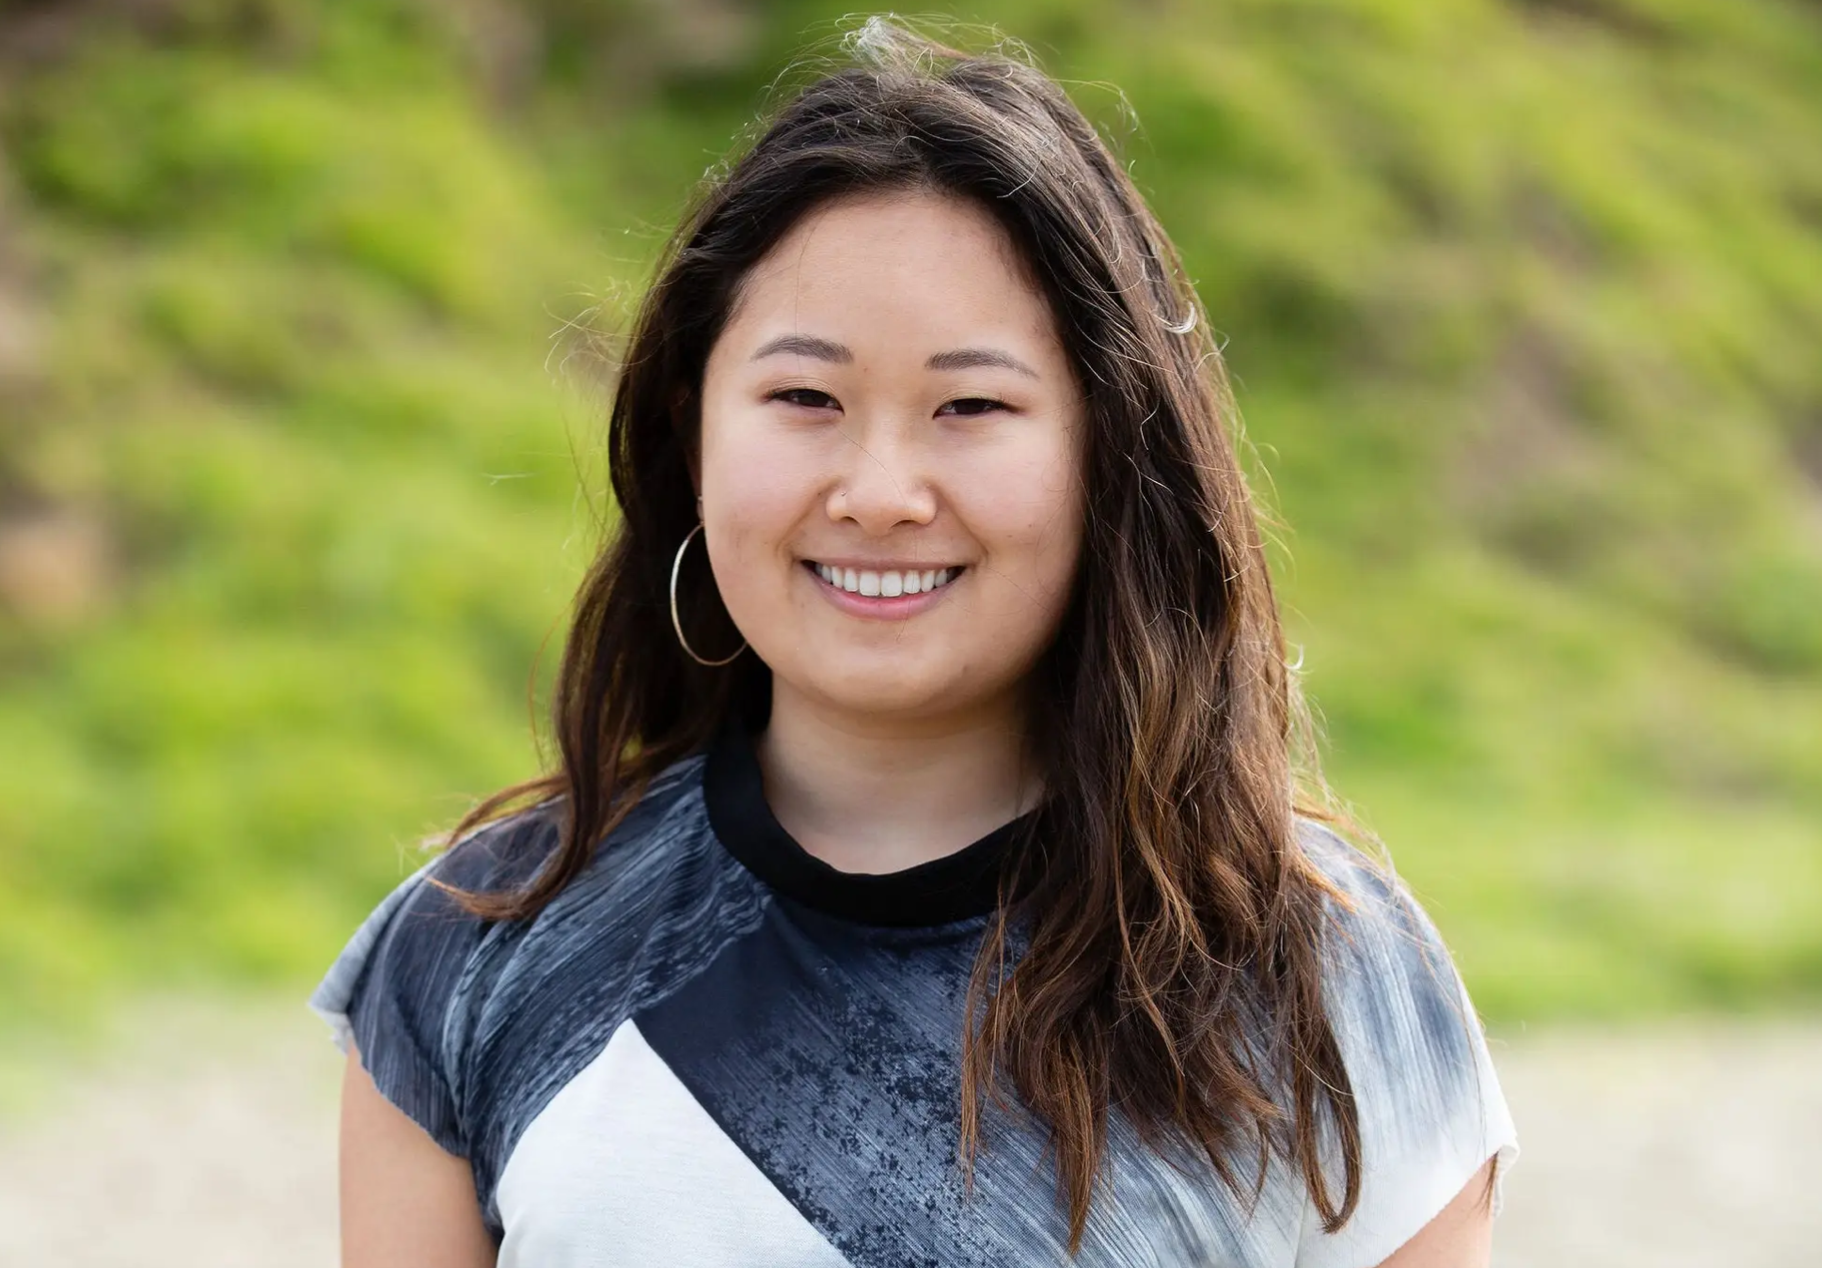 The Memo A 23-Year-Old Used Instead Of A Pitch Deck To Raise $4.5 Million For Her Startup